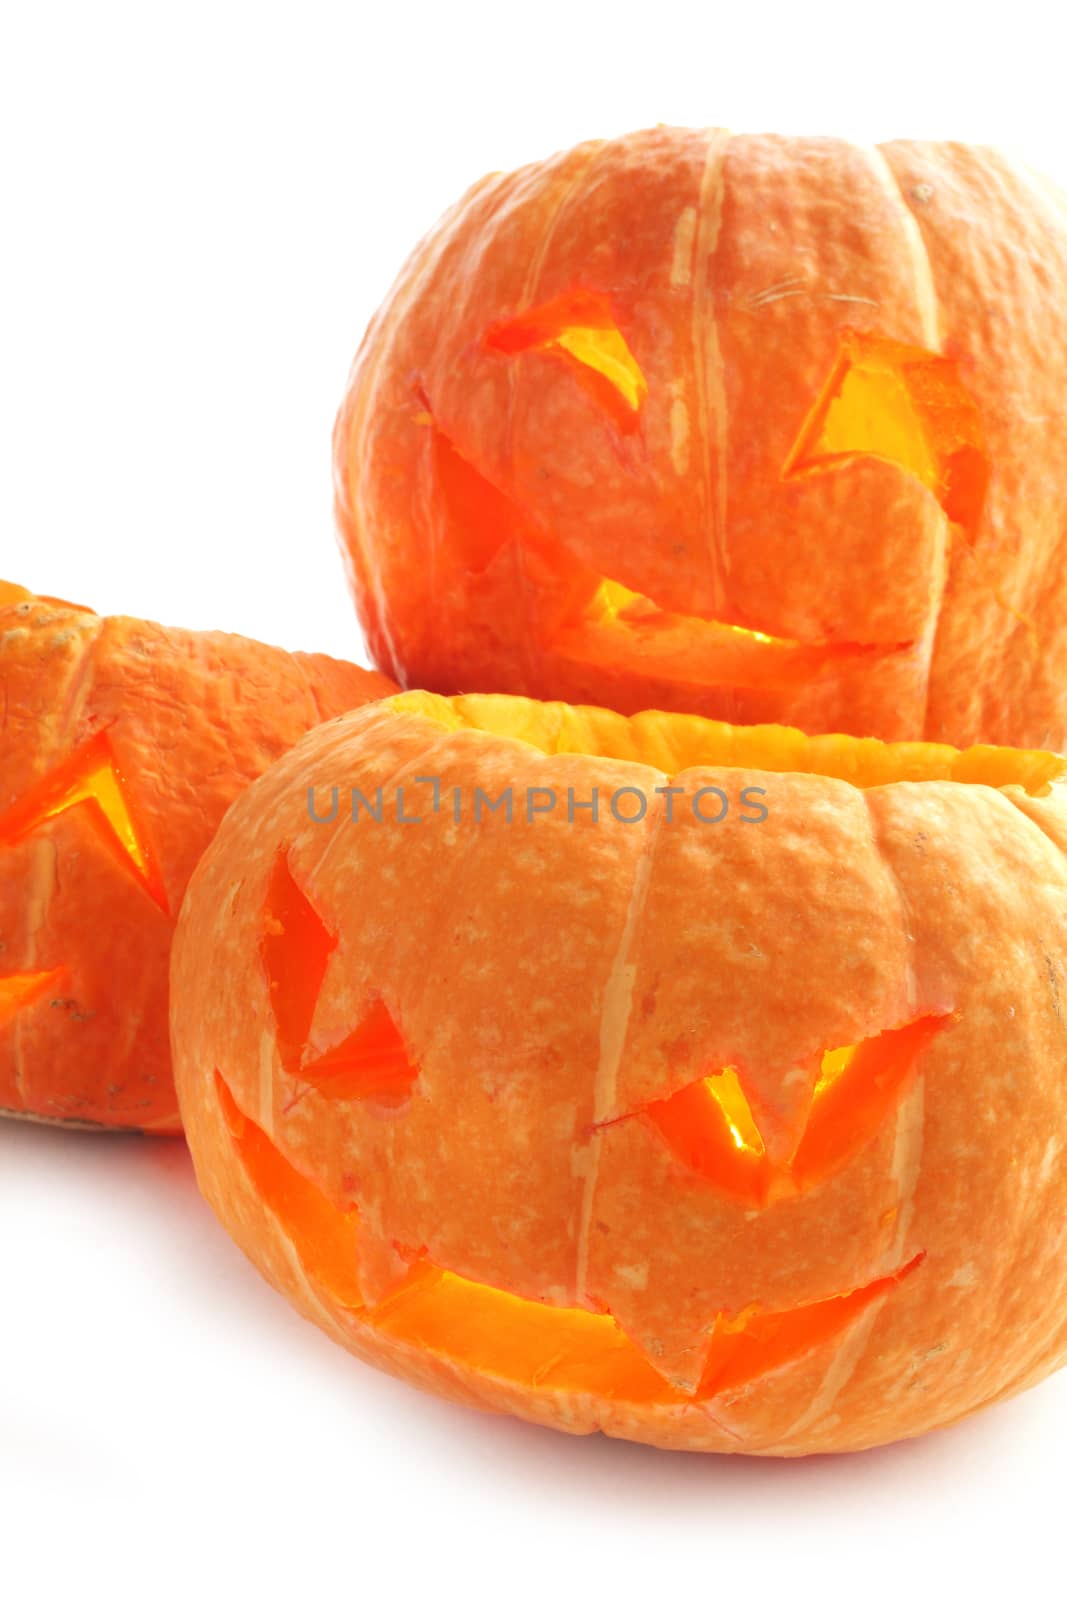 Glowing Halloween Pumpkins isolated on white background